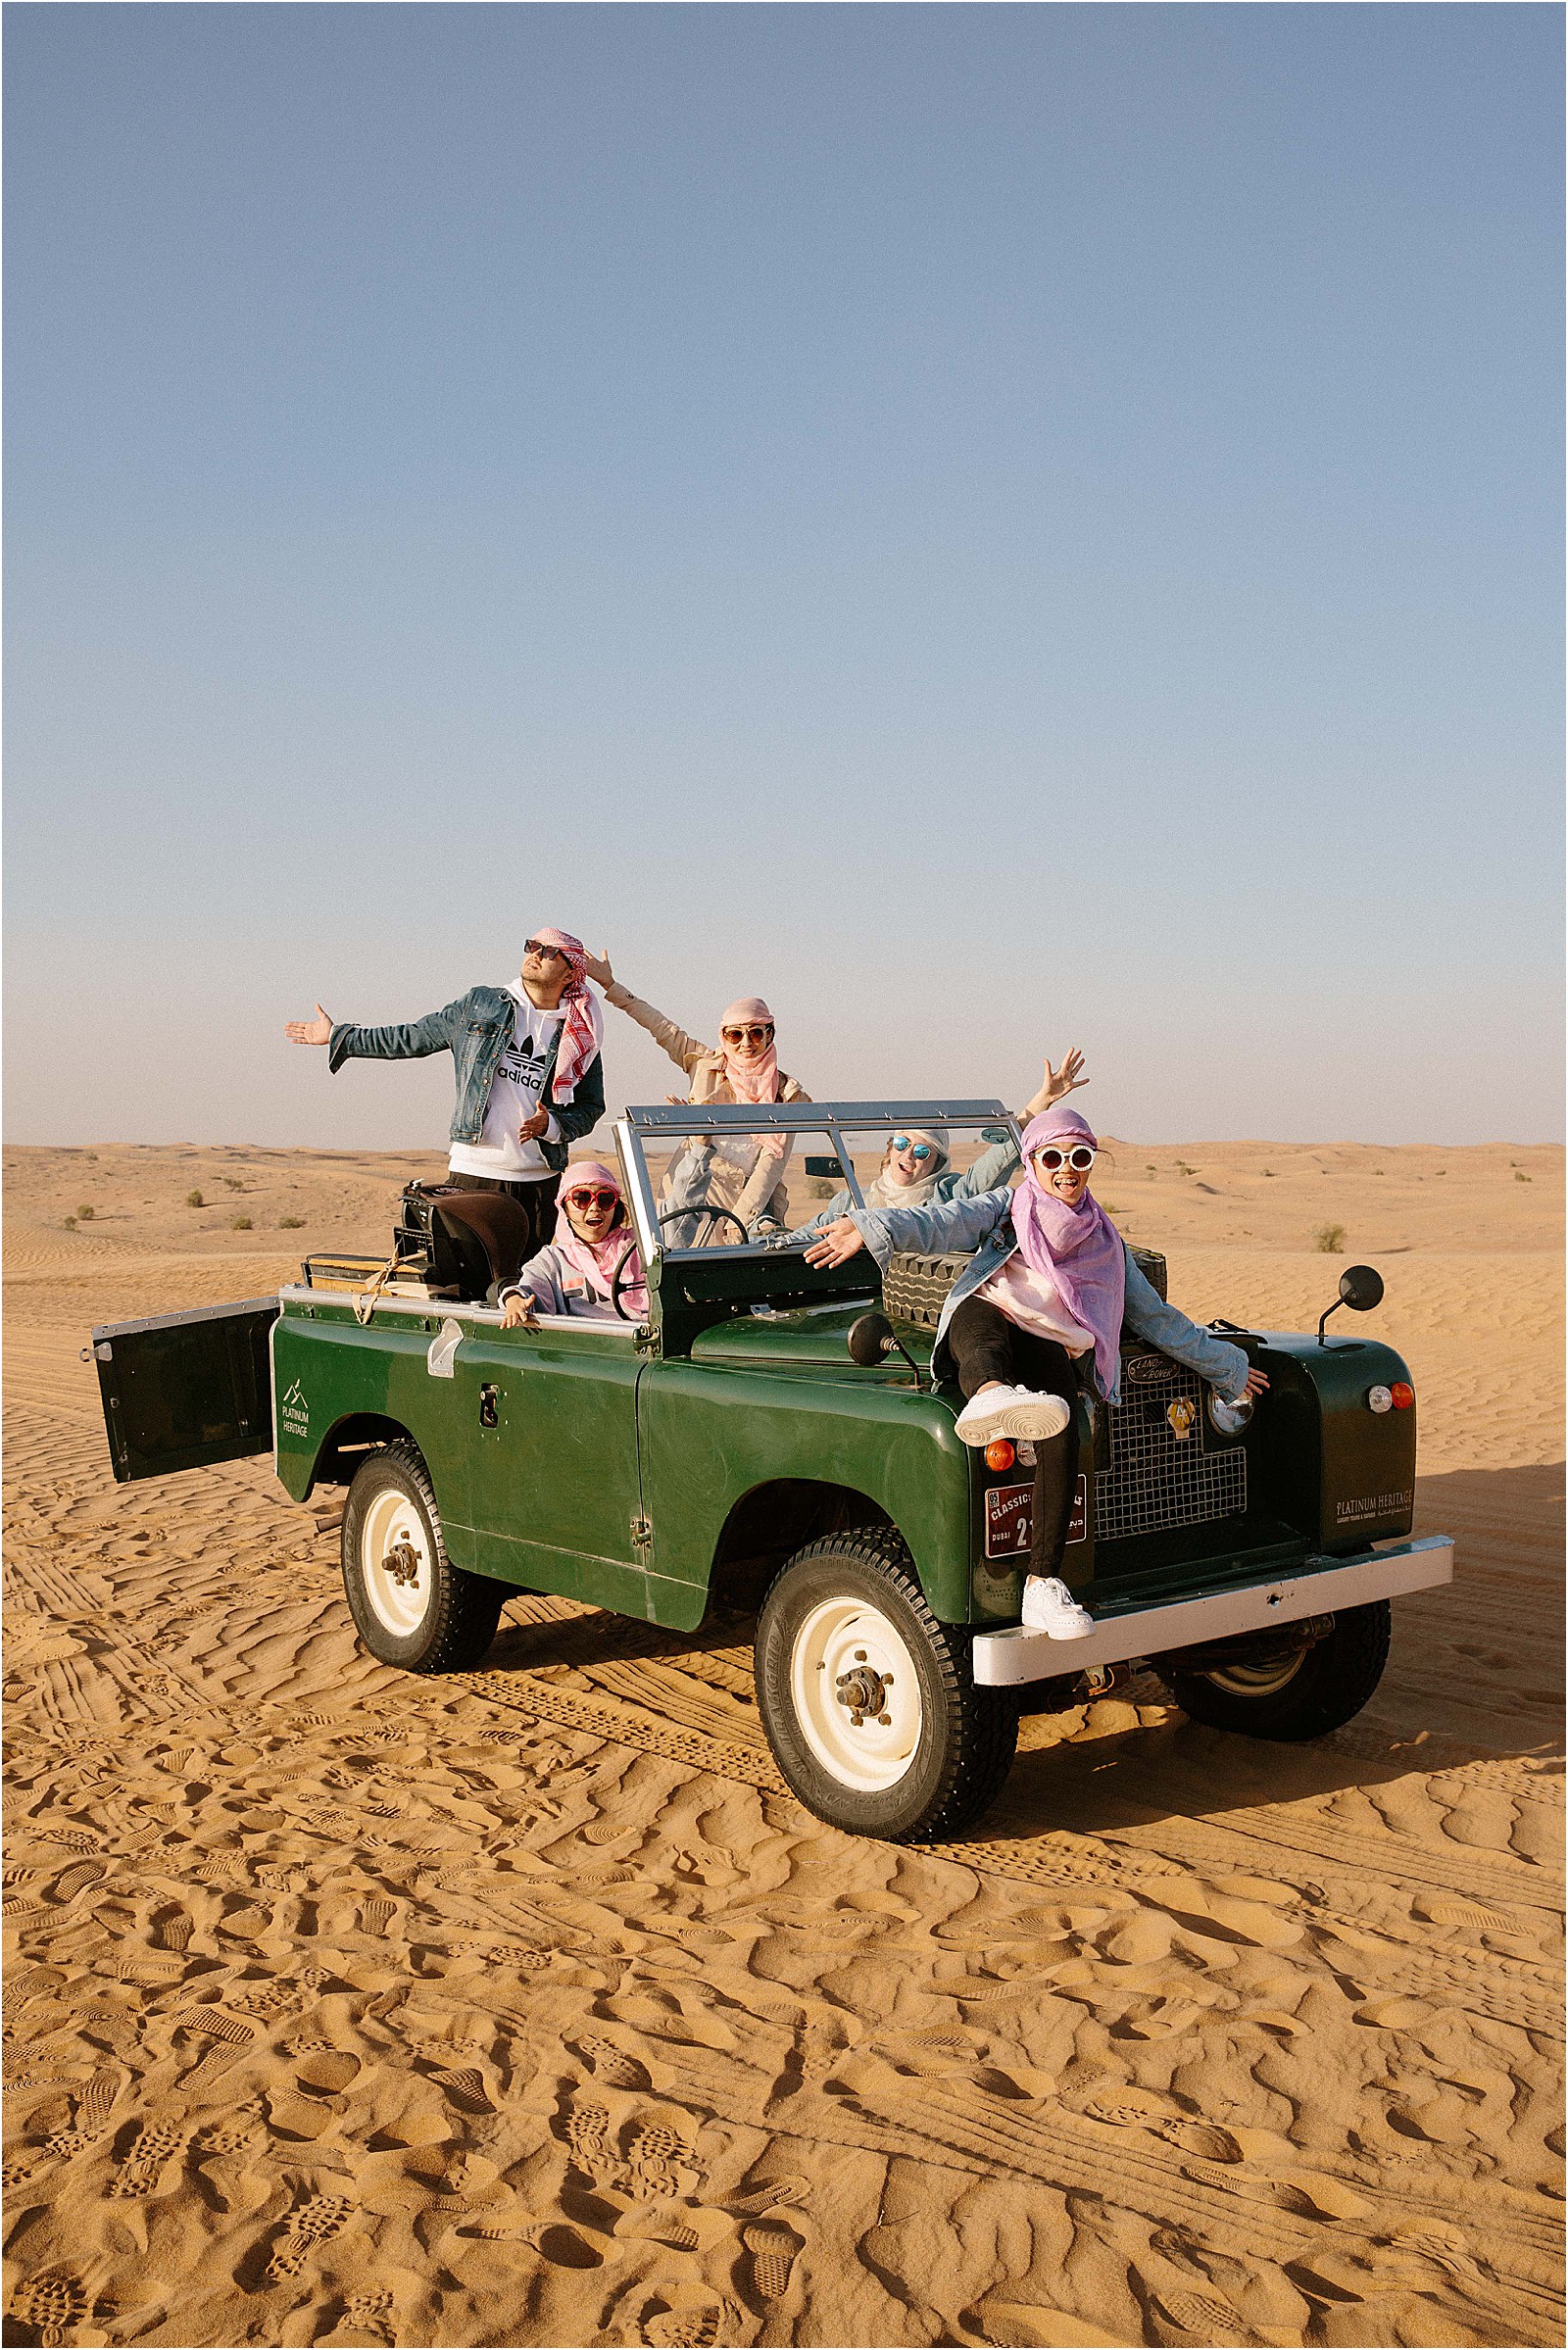 10 Reasons Why You Should Visit Dubai For Your Next Family Vacation